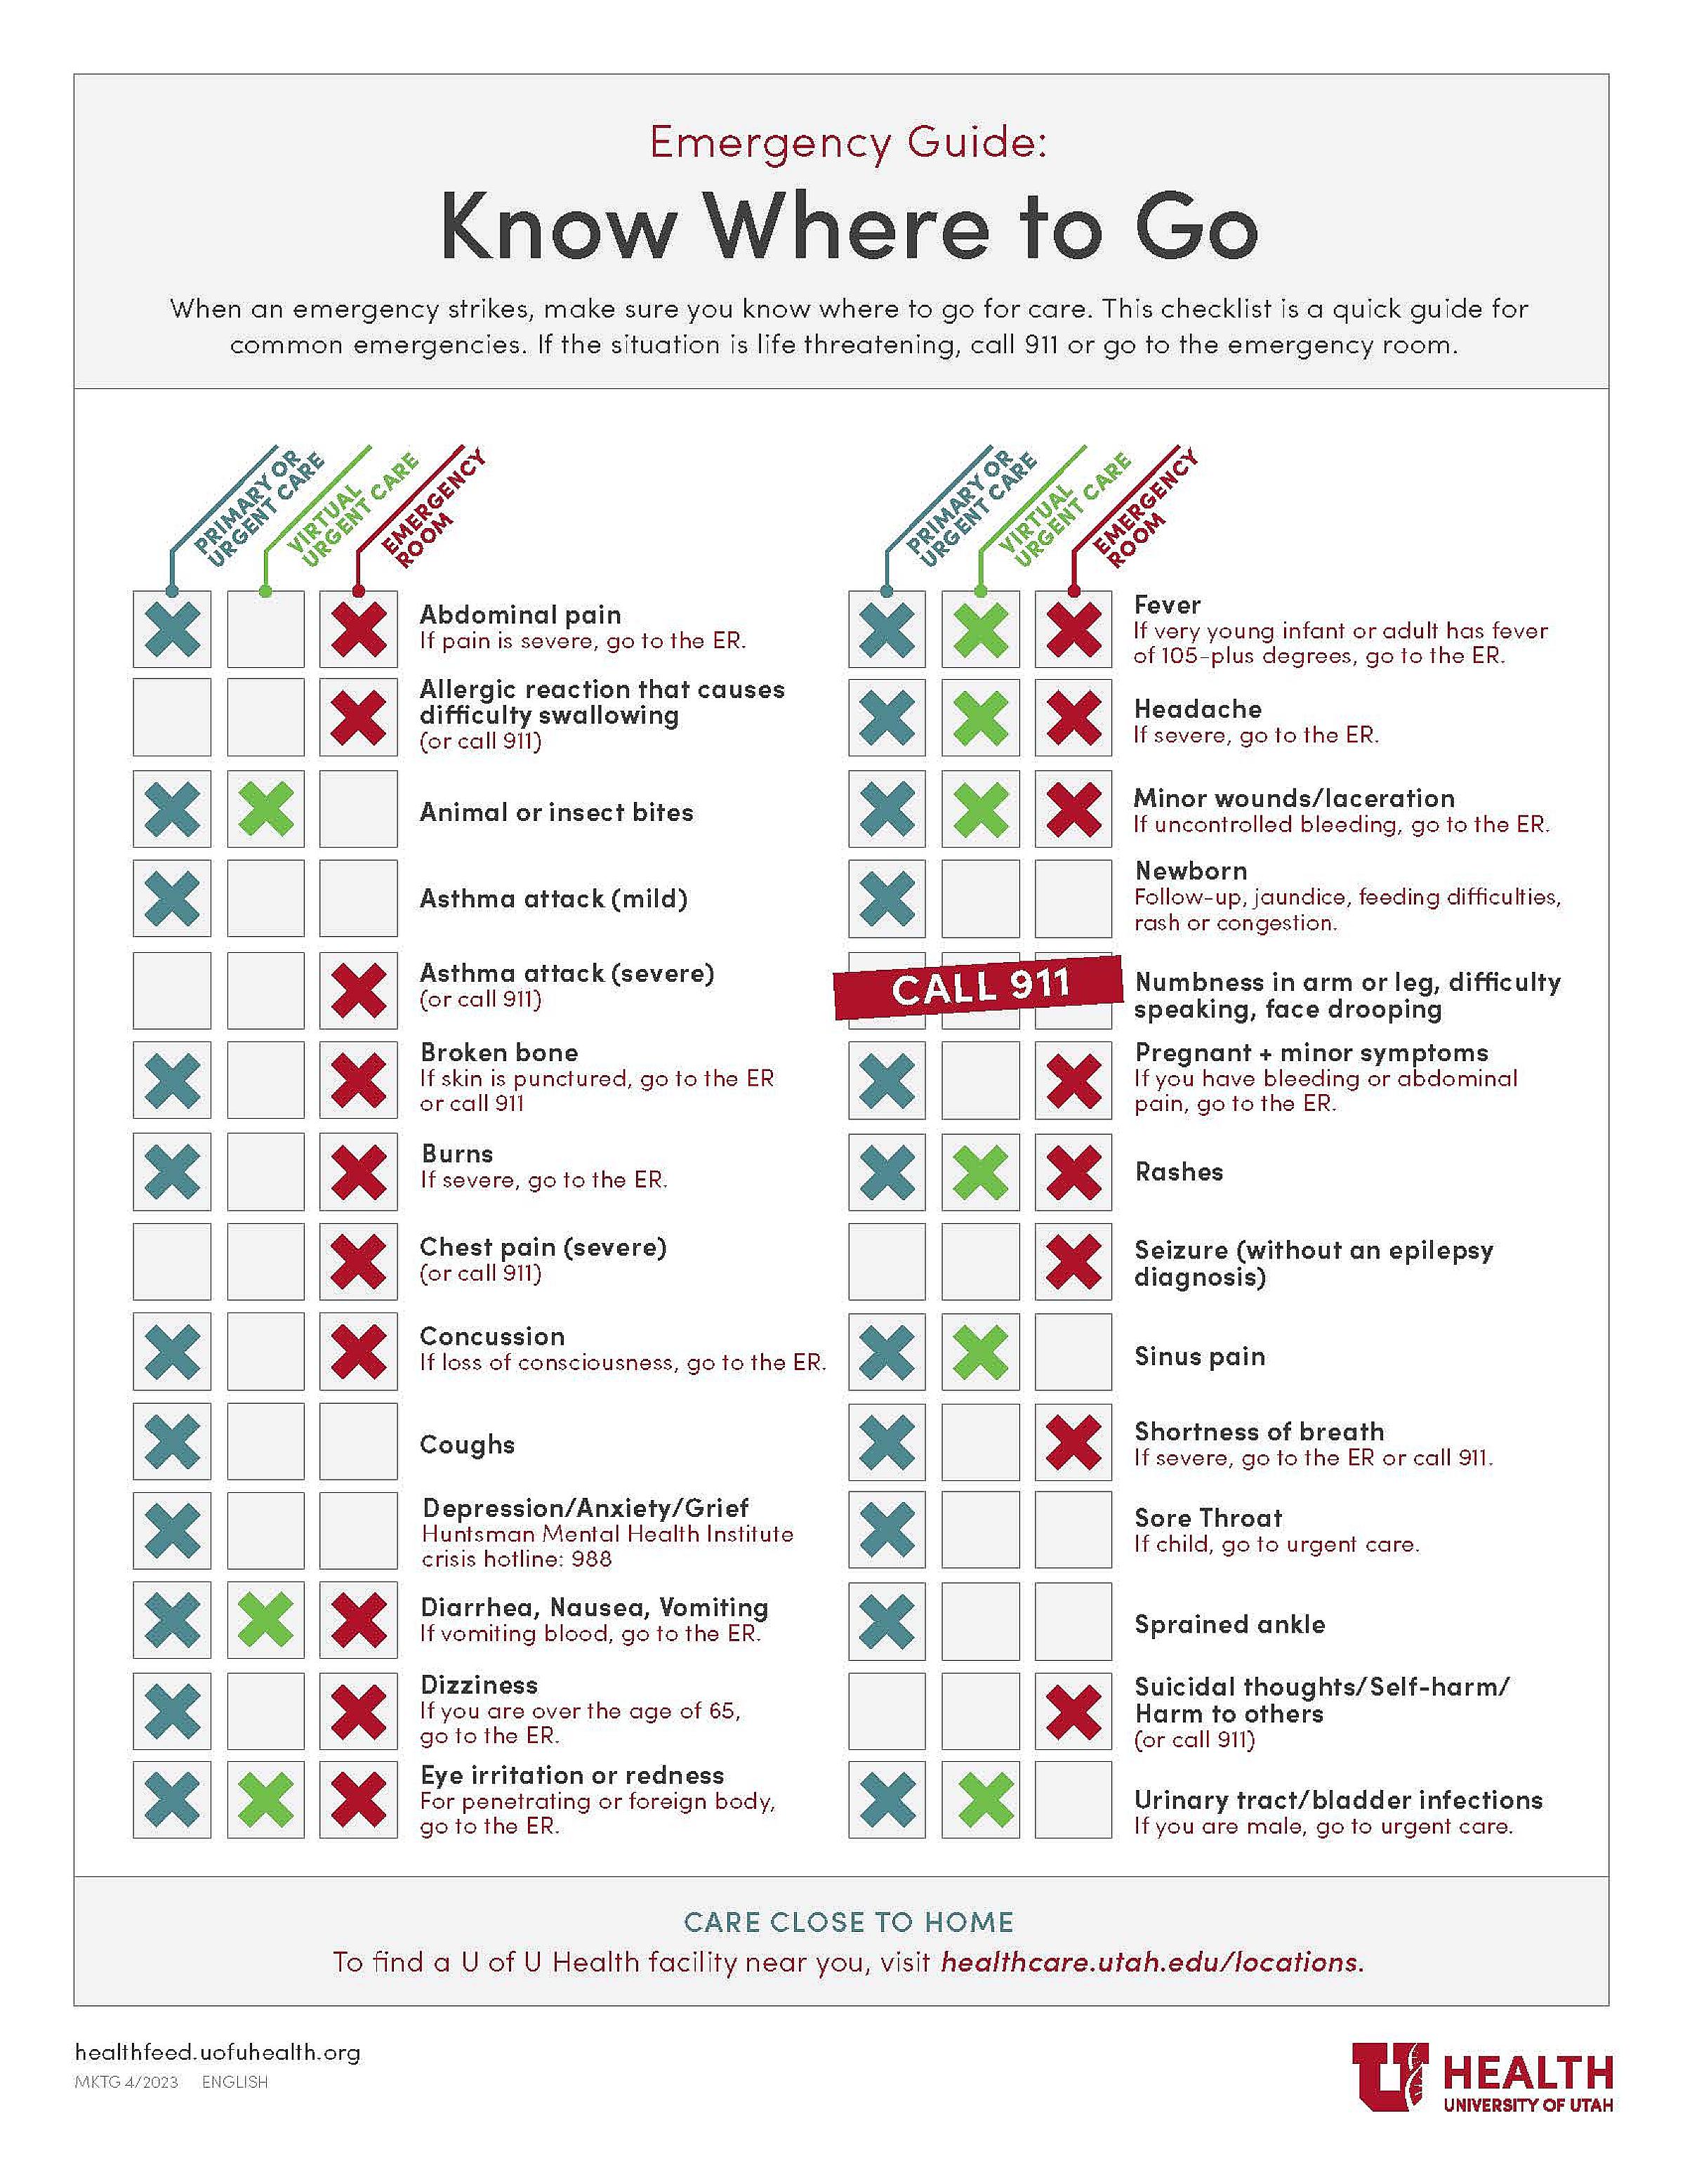 Emergency or urgent care decision tree chart